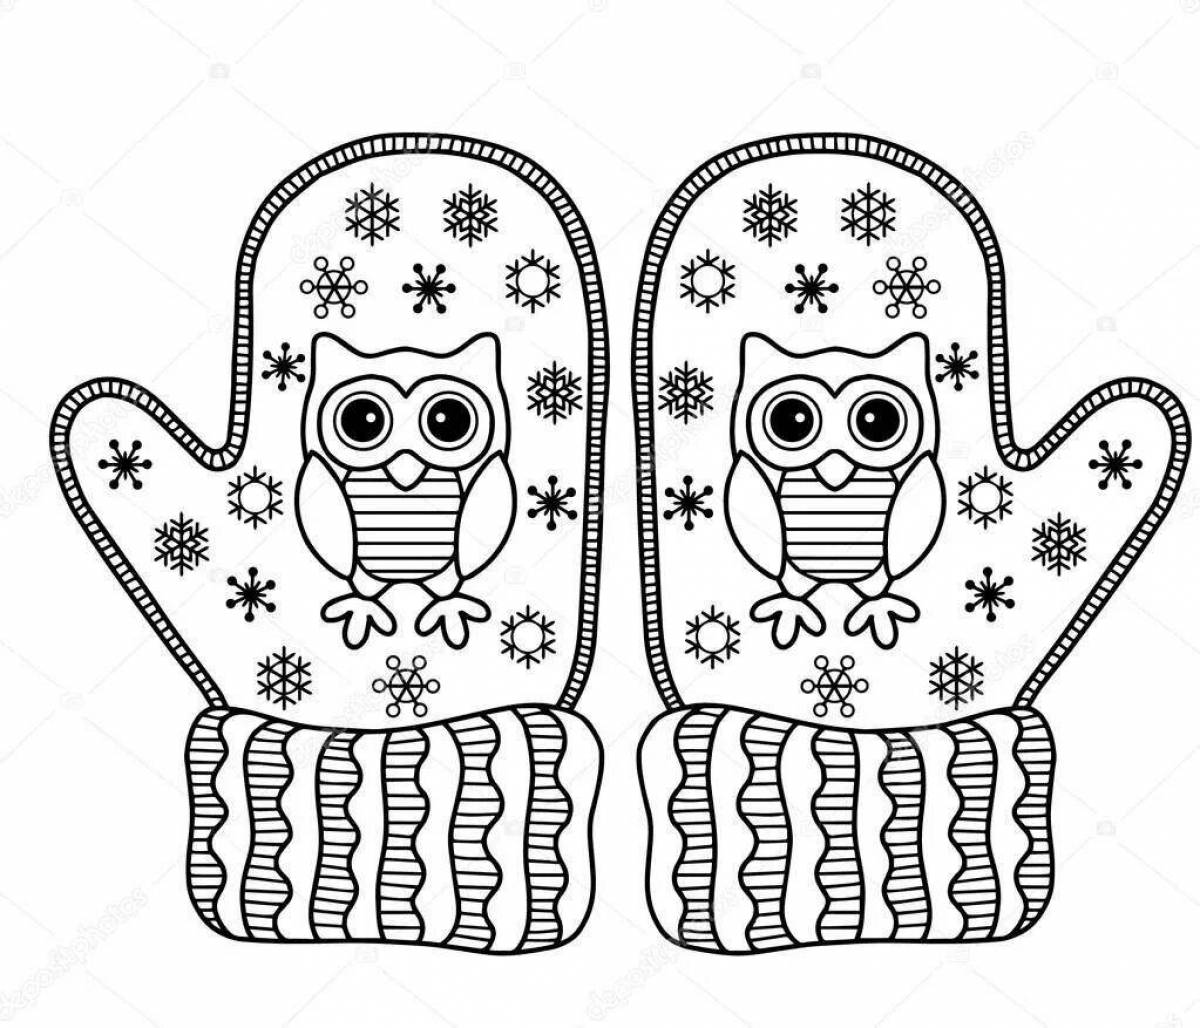 A fun coloring book for preschoolers with mittens